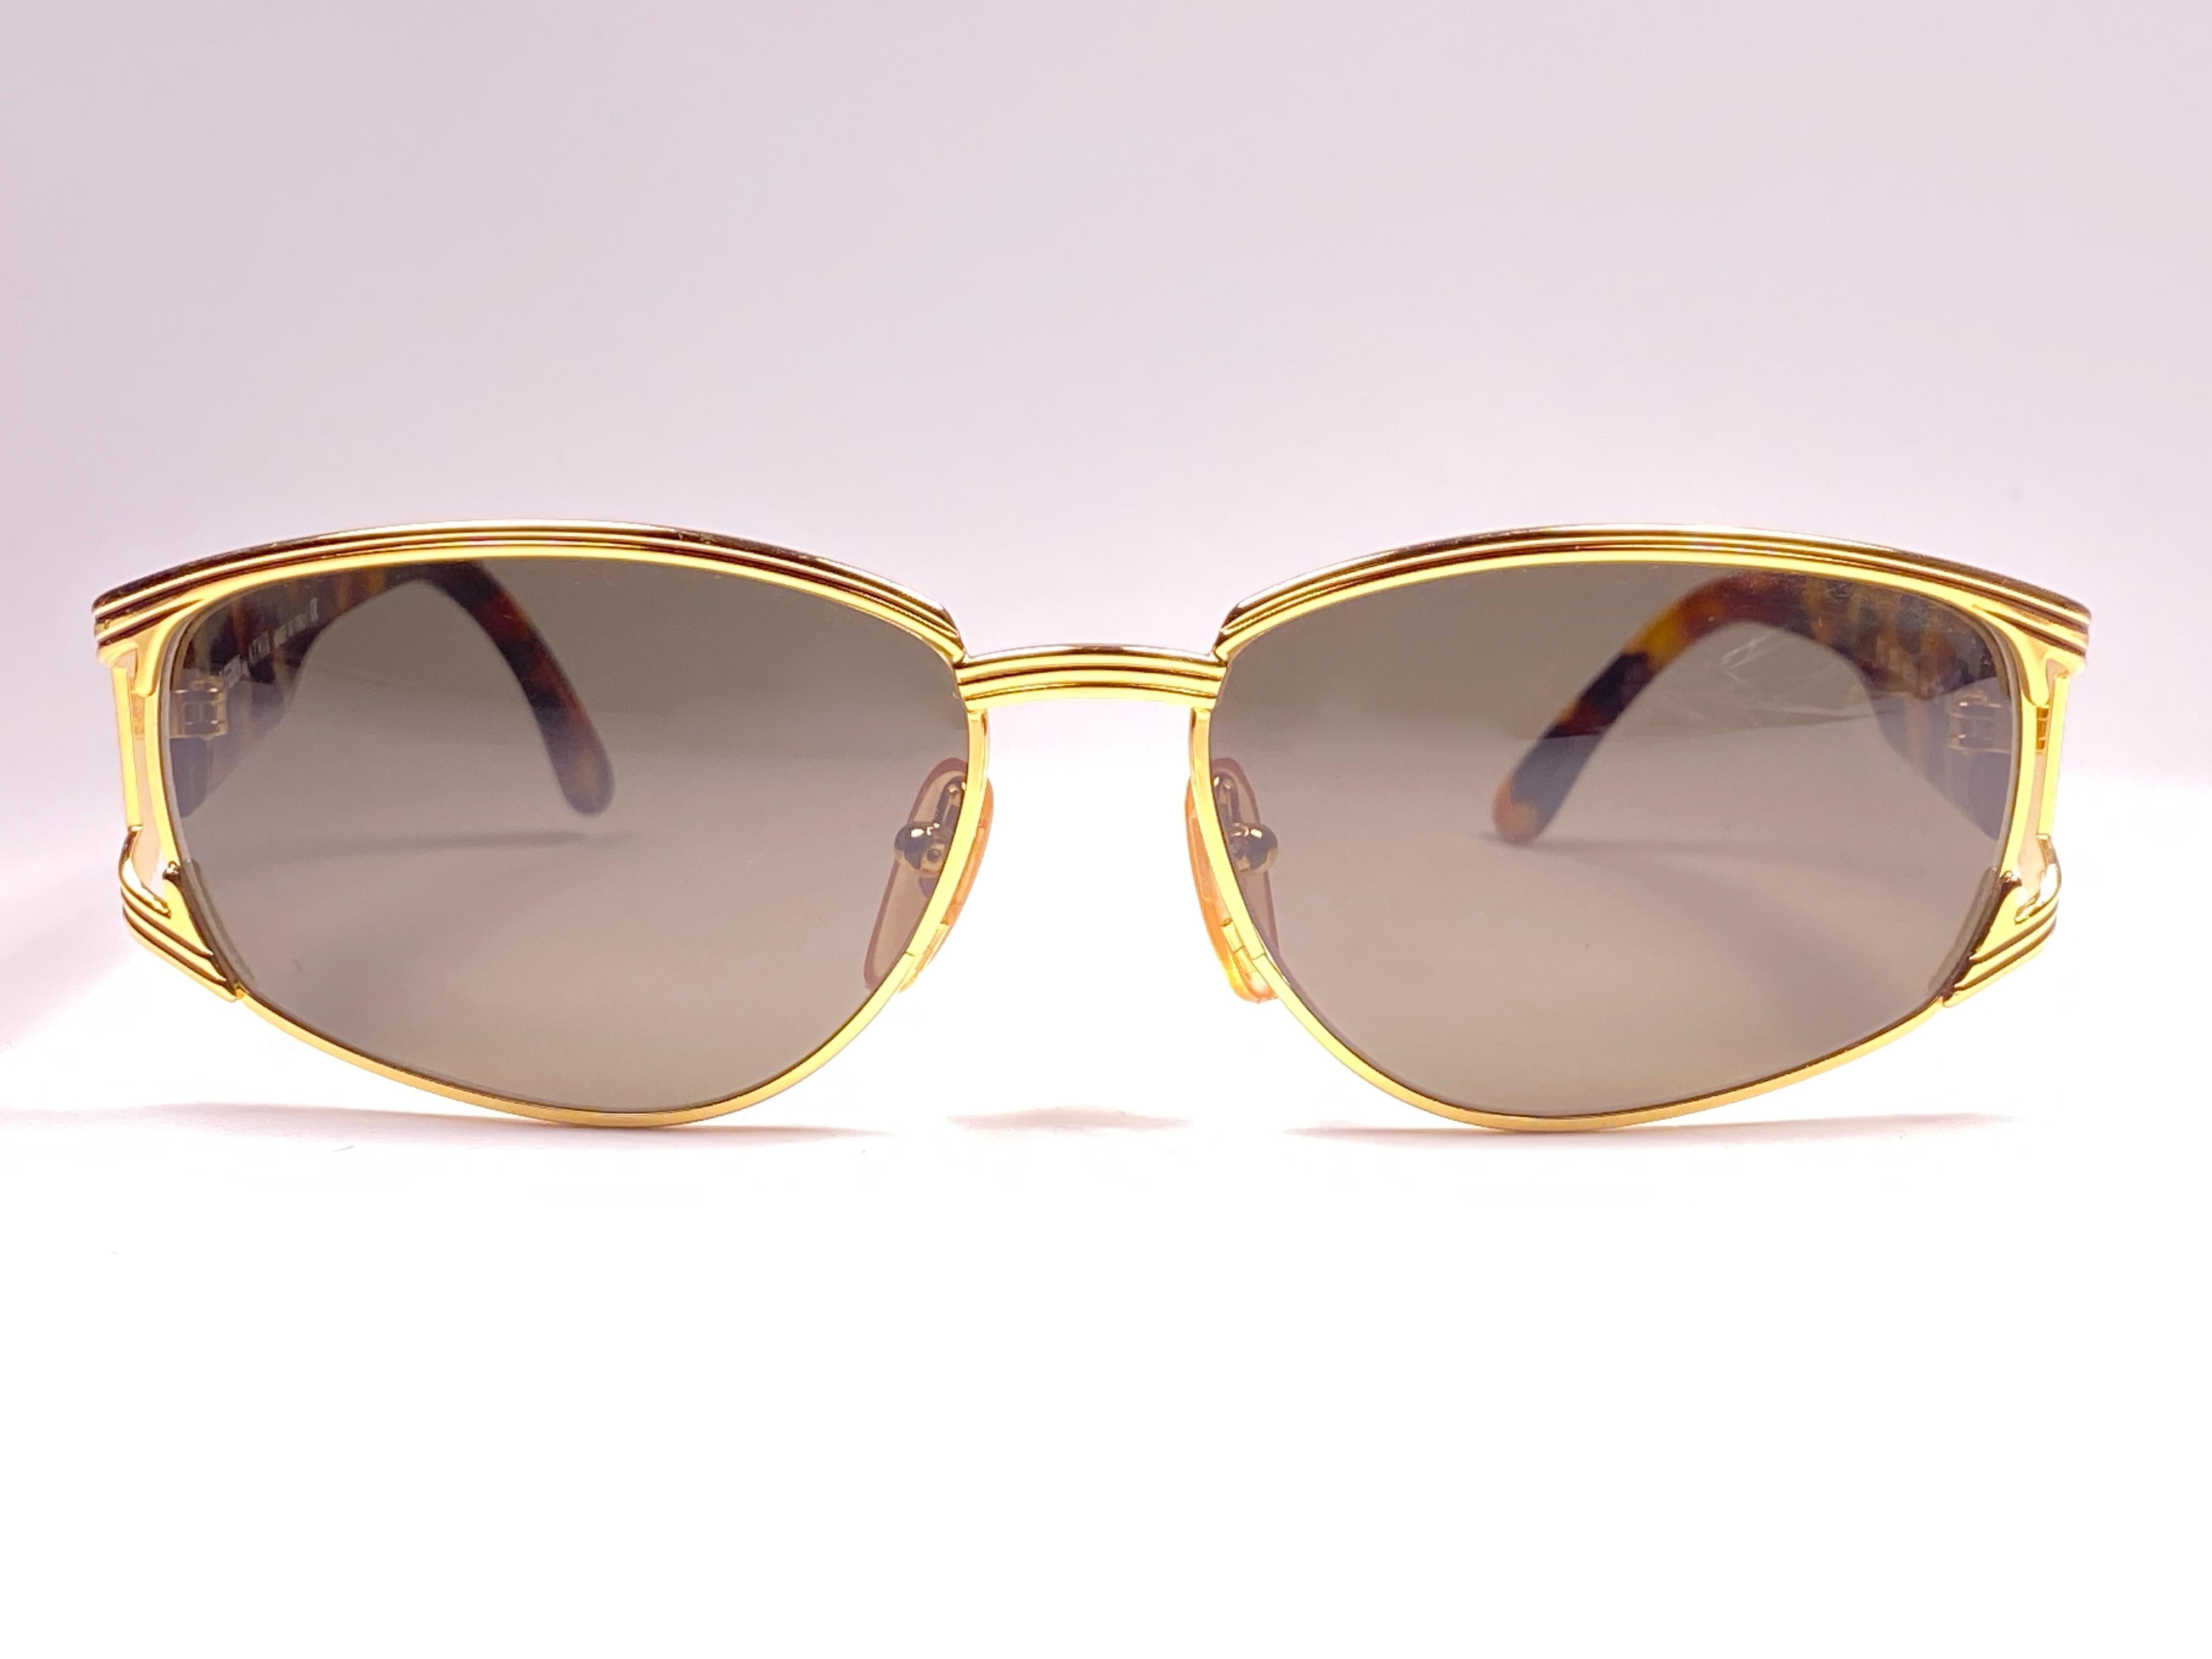 New Fendi gold & tortoise large frame with solid grey ( UV protection ) lenses.

Made in Italy.
 
Produced and design in 1990's.

New, never worn or displayed. this  item may show minor sign of wear due to storage.